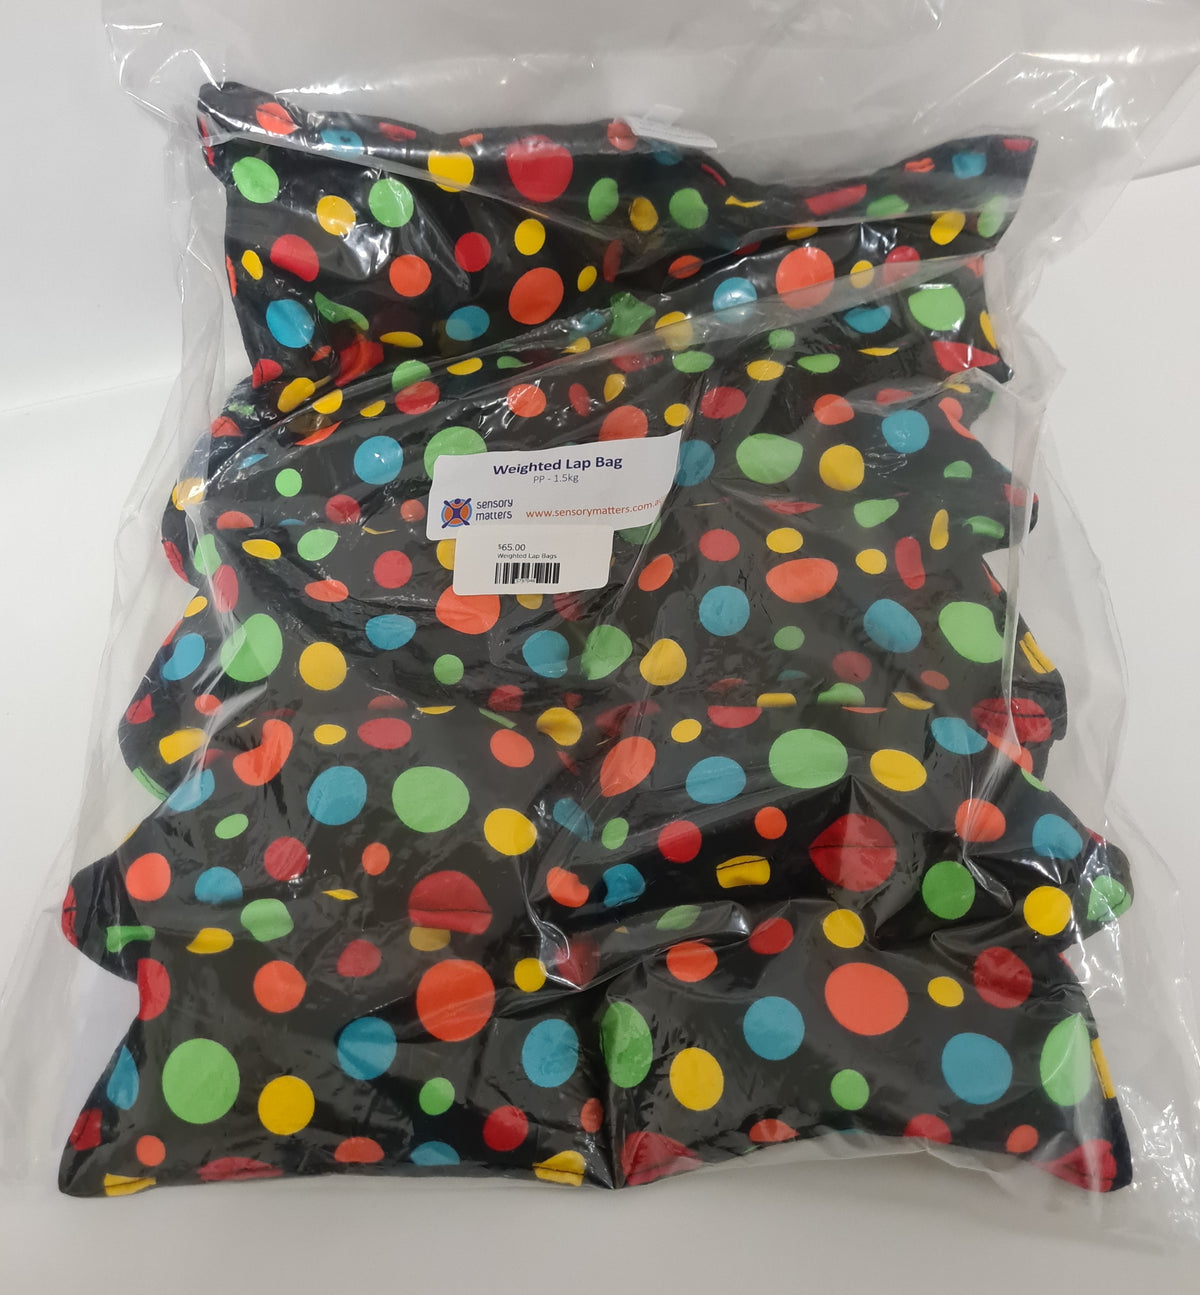 Weighted Lap Bag/Blanket